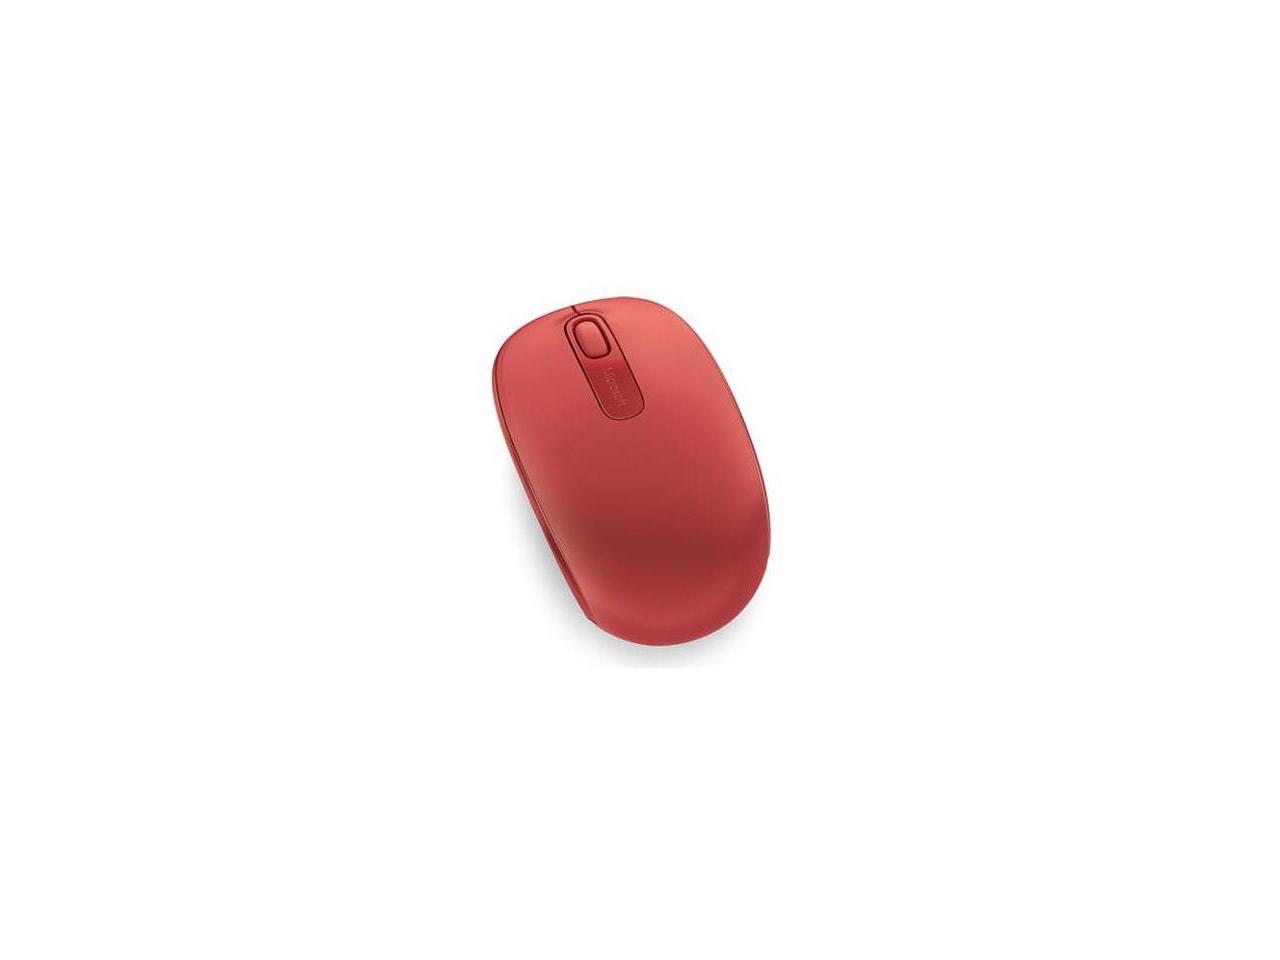 Microsoft Wireless Mobile Mouse 1850 - Flame Red (U7Z-00031) - image 4 of 20